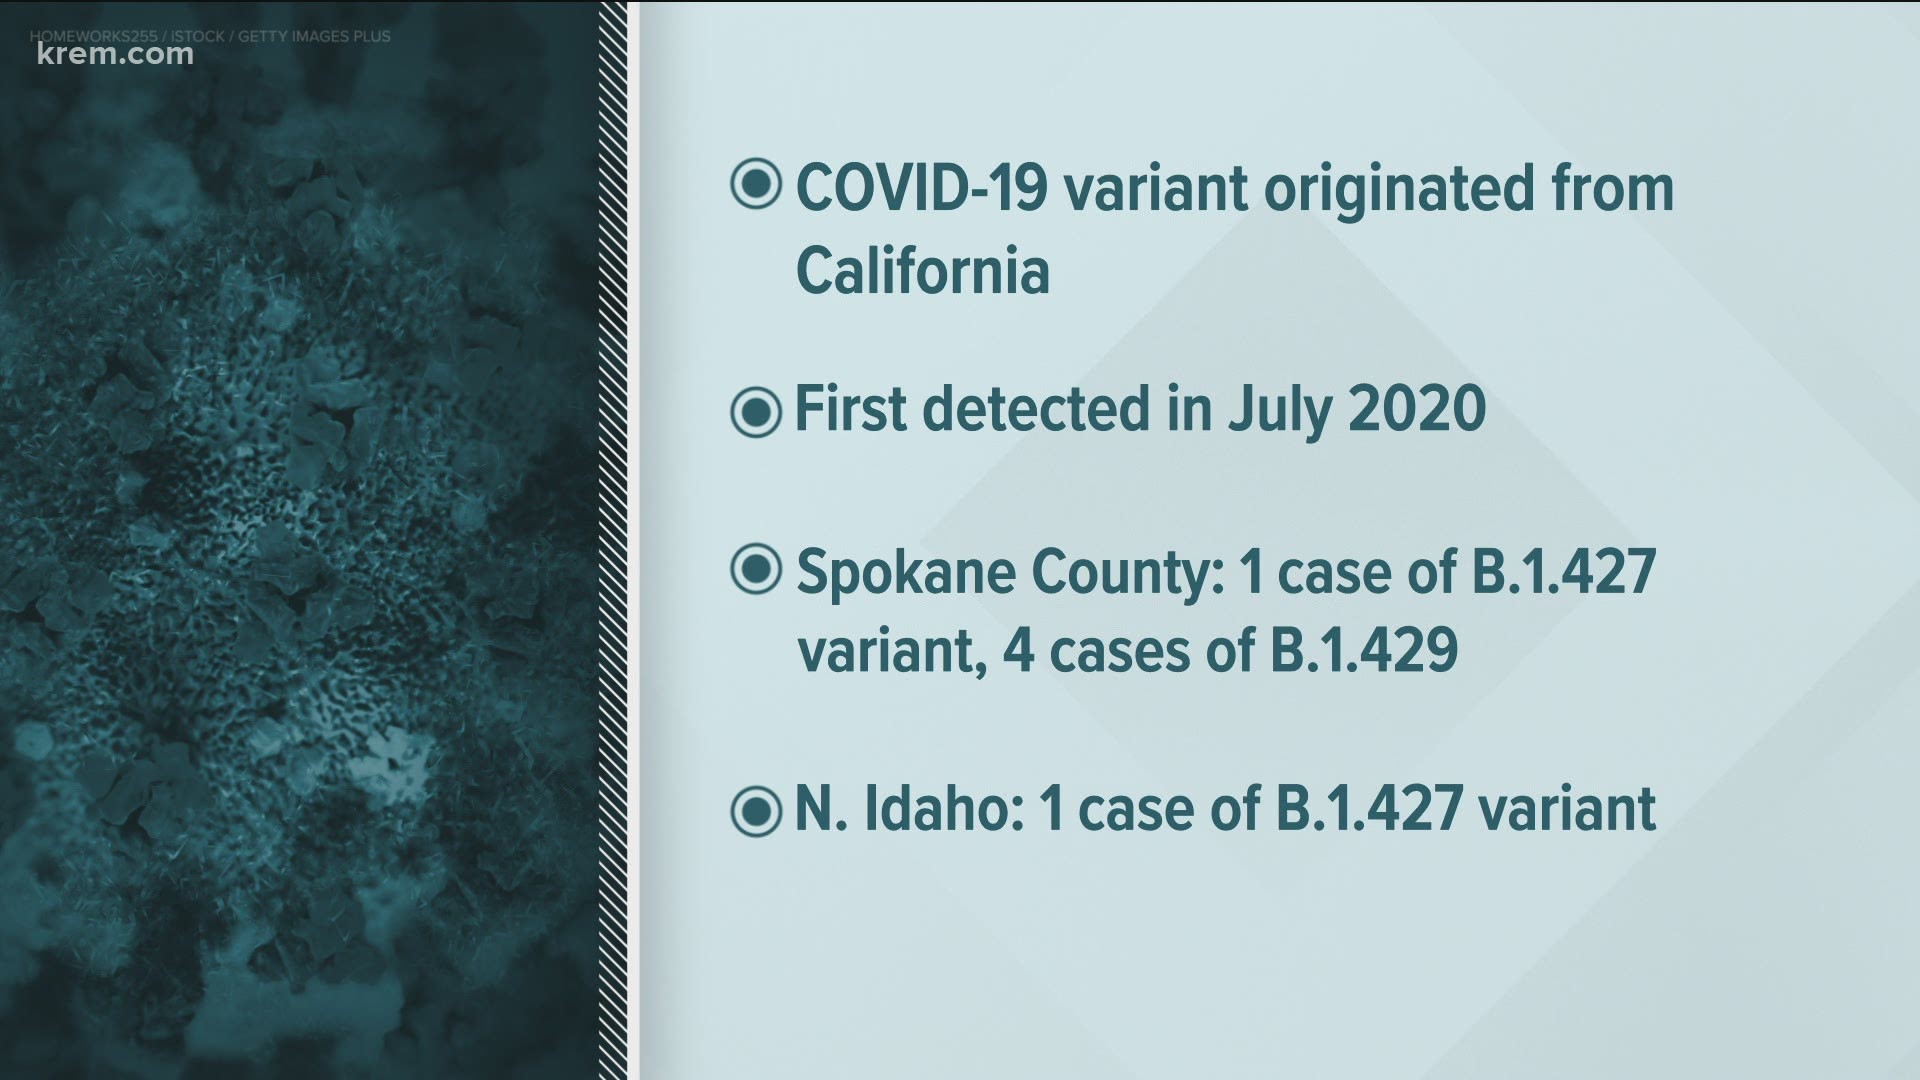 The B.1.427/B.1.429 variant was initially detected in California in July 2020. Early research suggests it may be more infectious and could cause more severe disease.